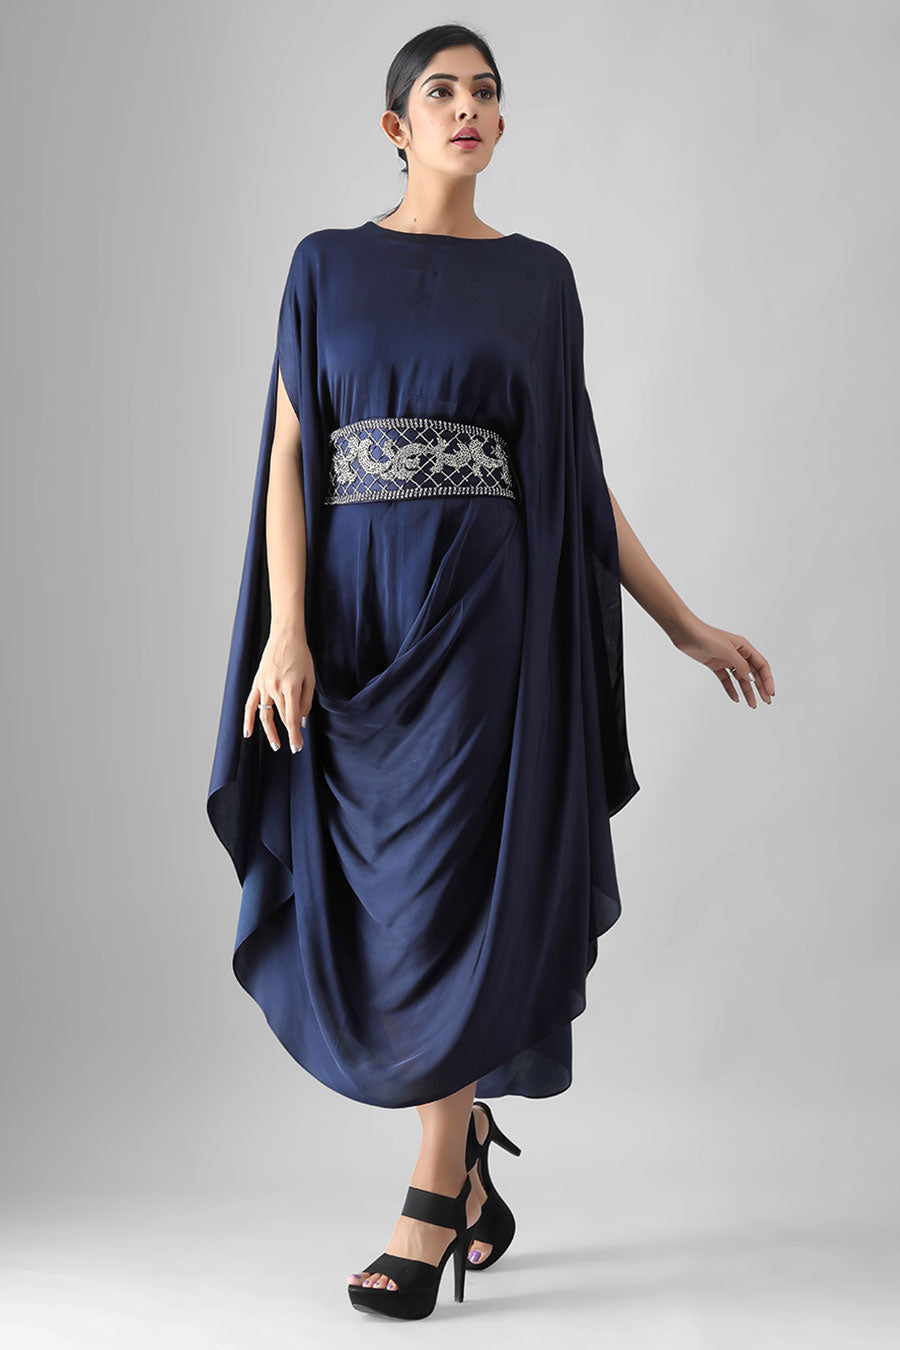 Navy Blue Drape Dress with Embroidered Belt